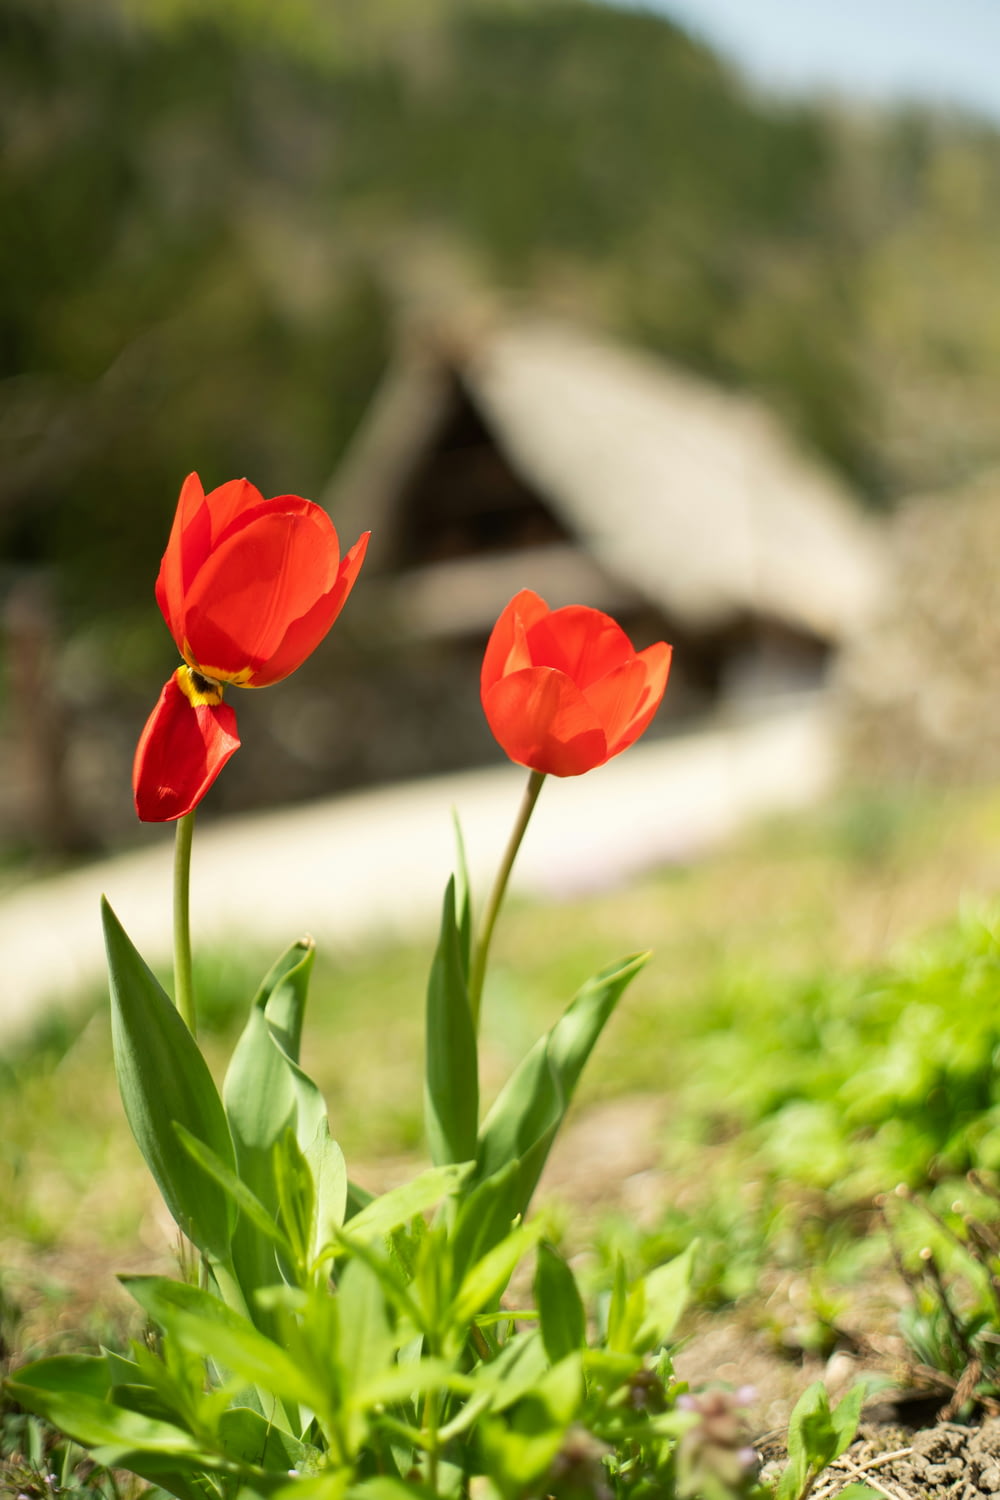 two red tulips in a field with a house in the background